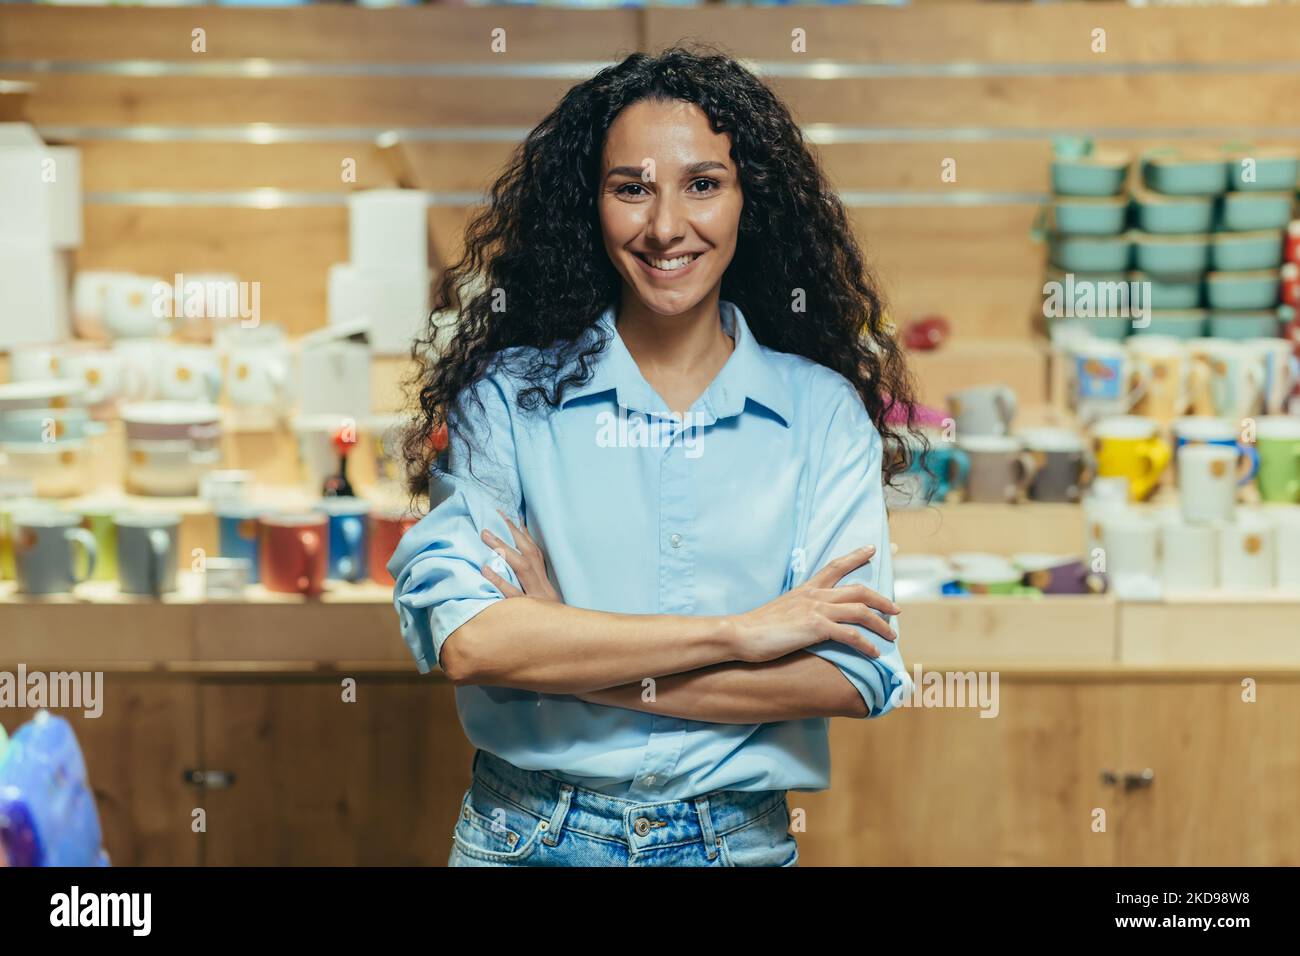 Portrait of business owner, hispanic woman managing gift shop, woman with curly hair looking at camera and smiling with arms crossed. Stock Photo